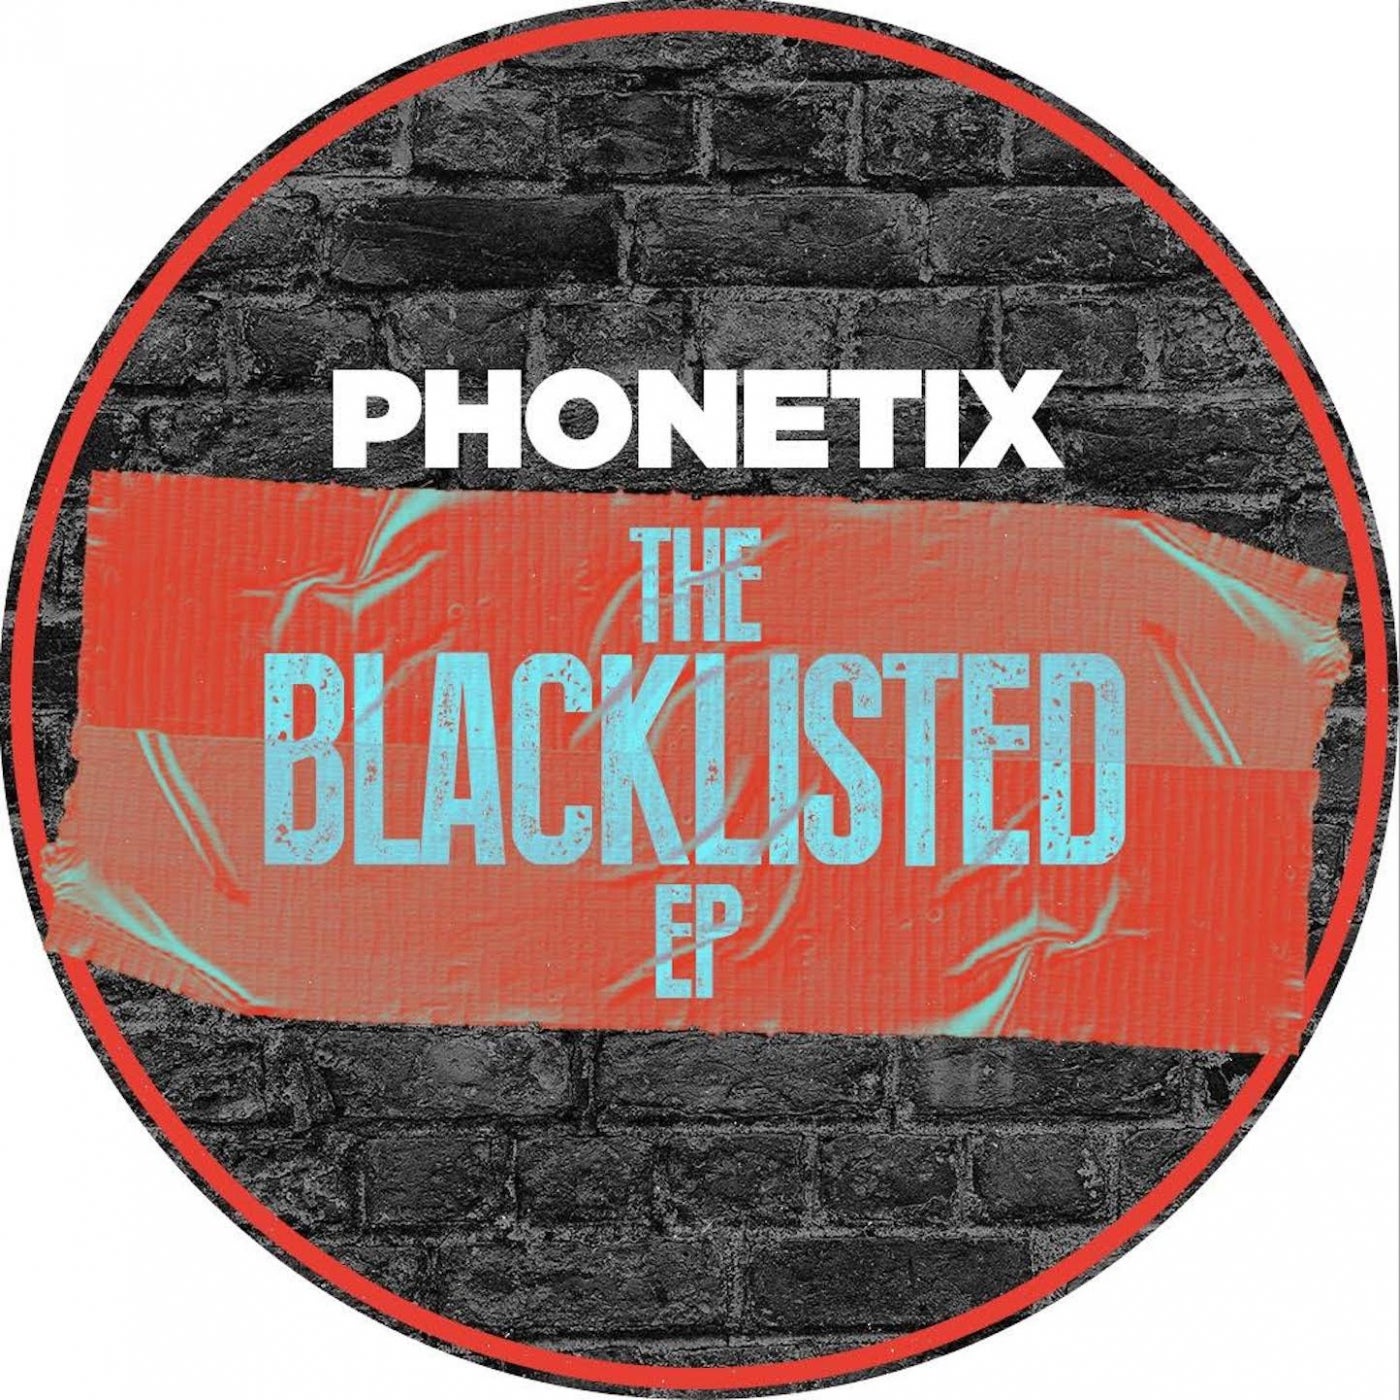 The Blacklisted EP